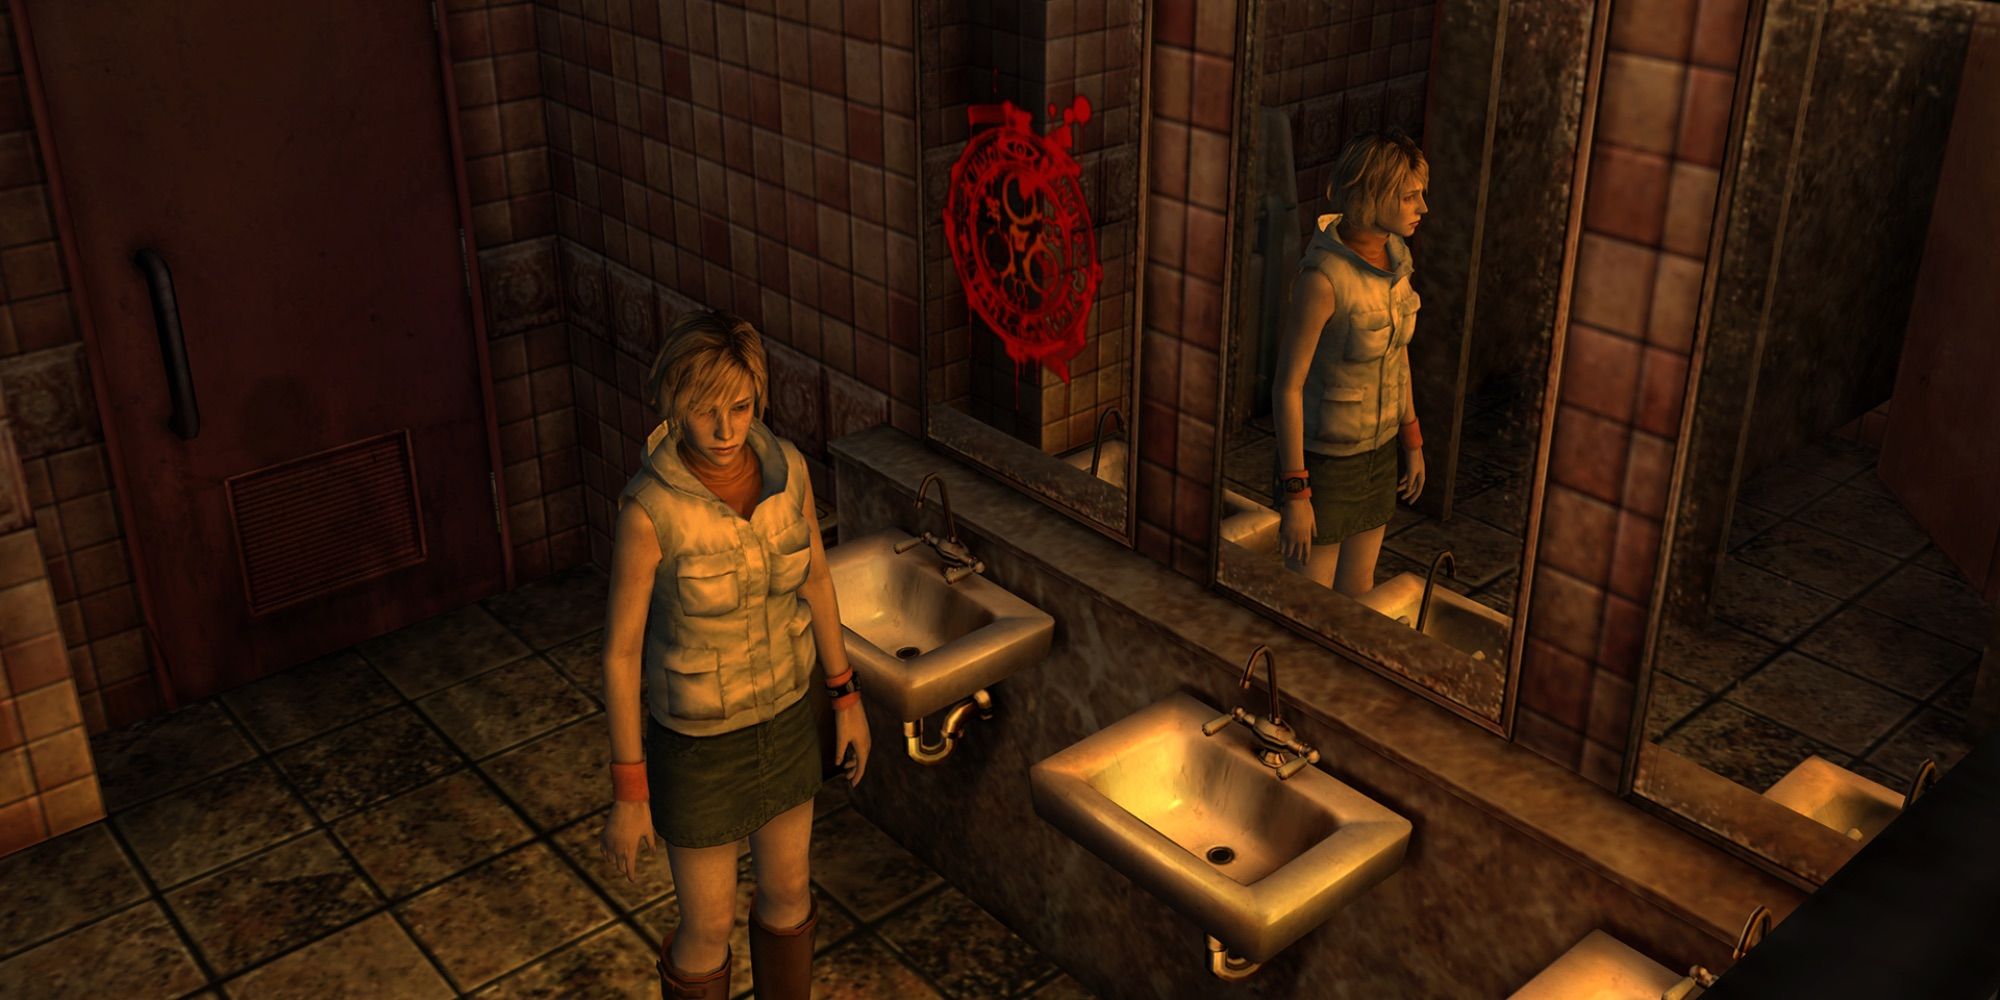 silent hill 1 pc game download